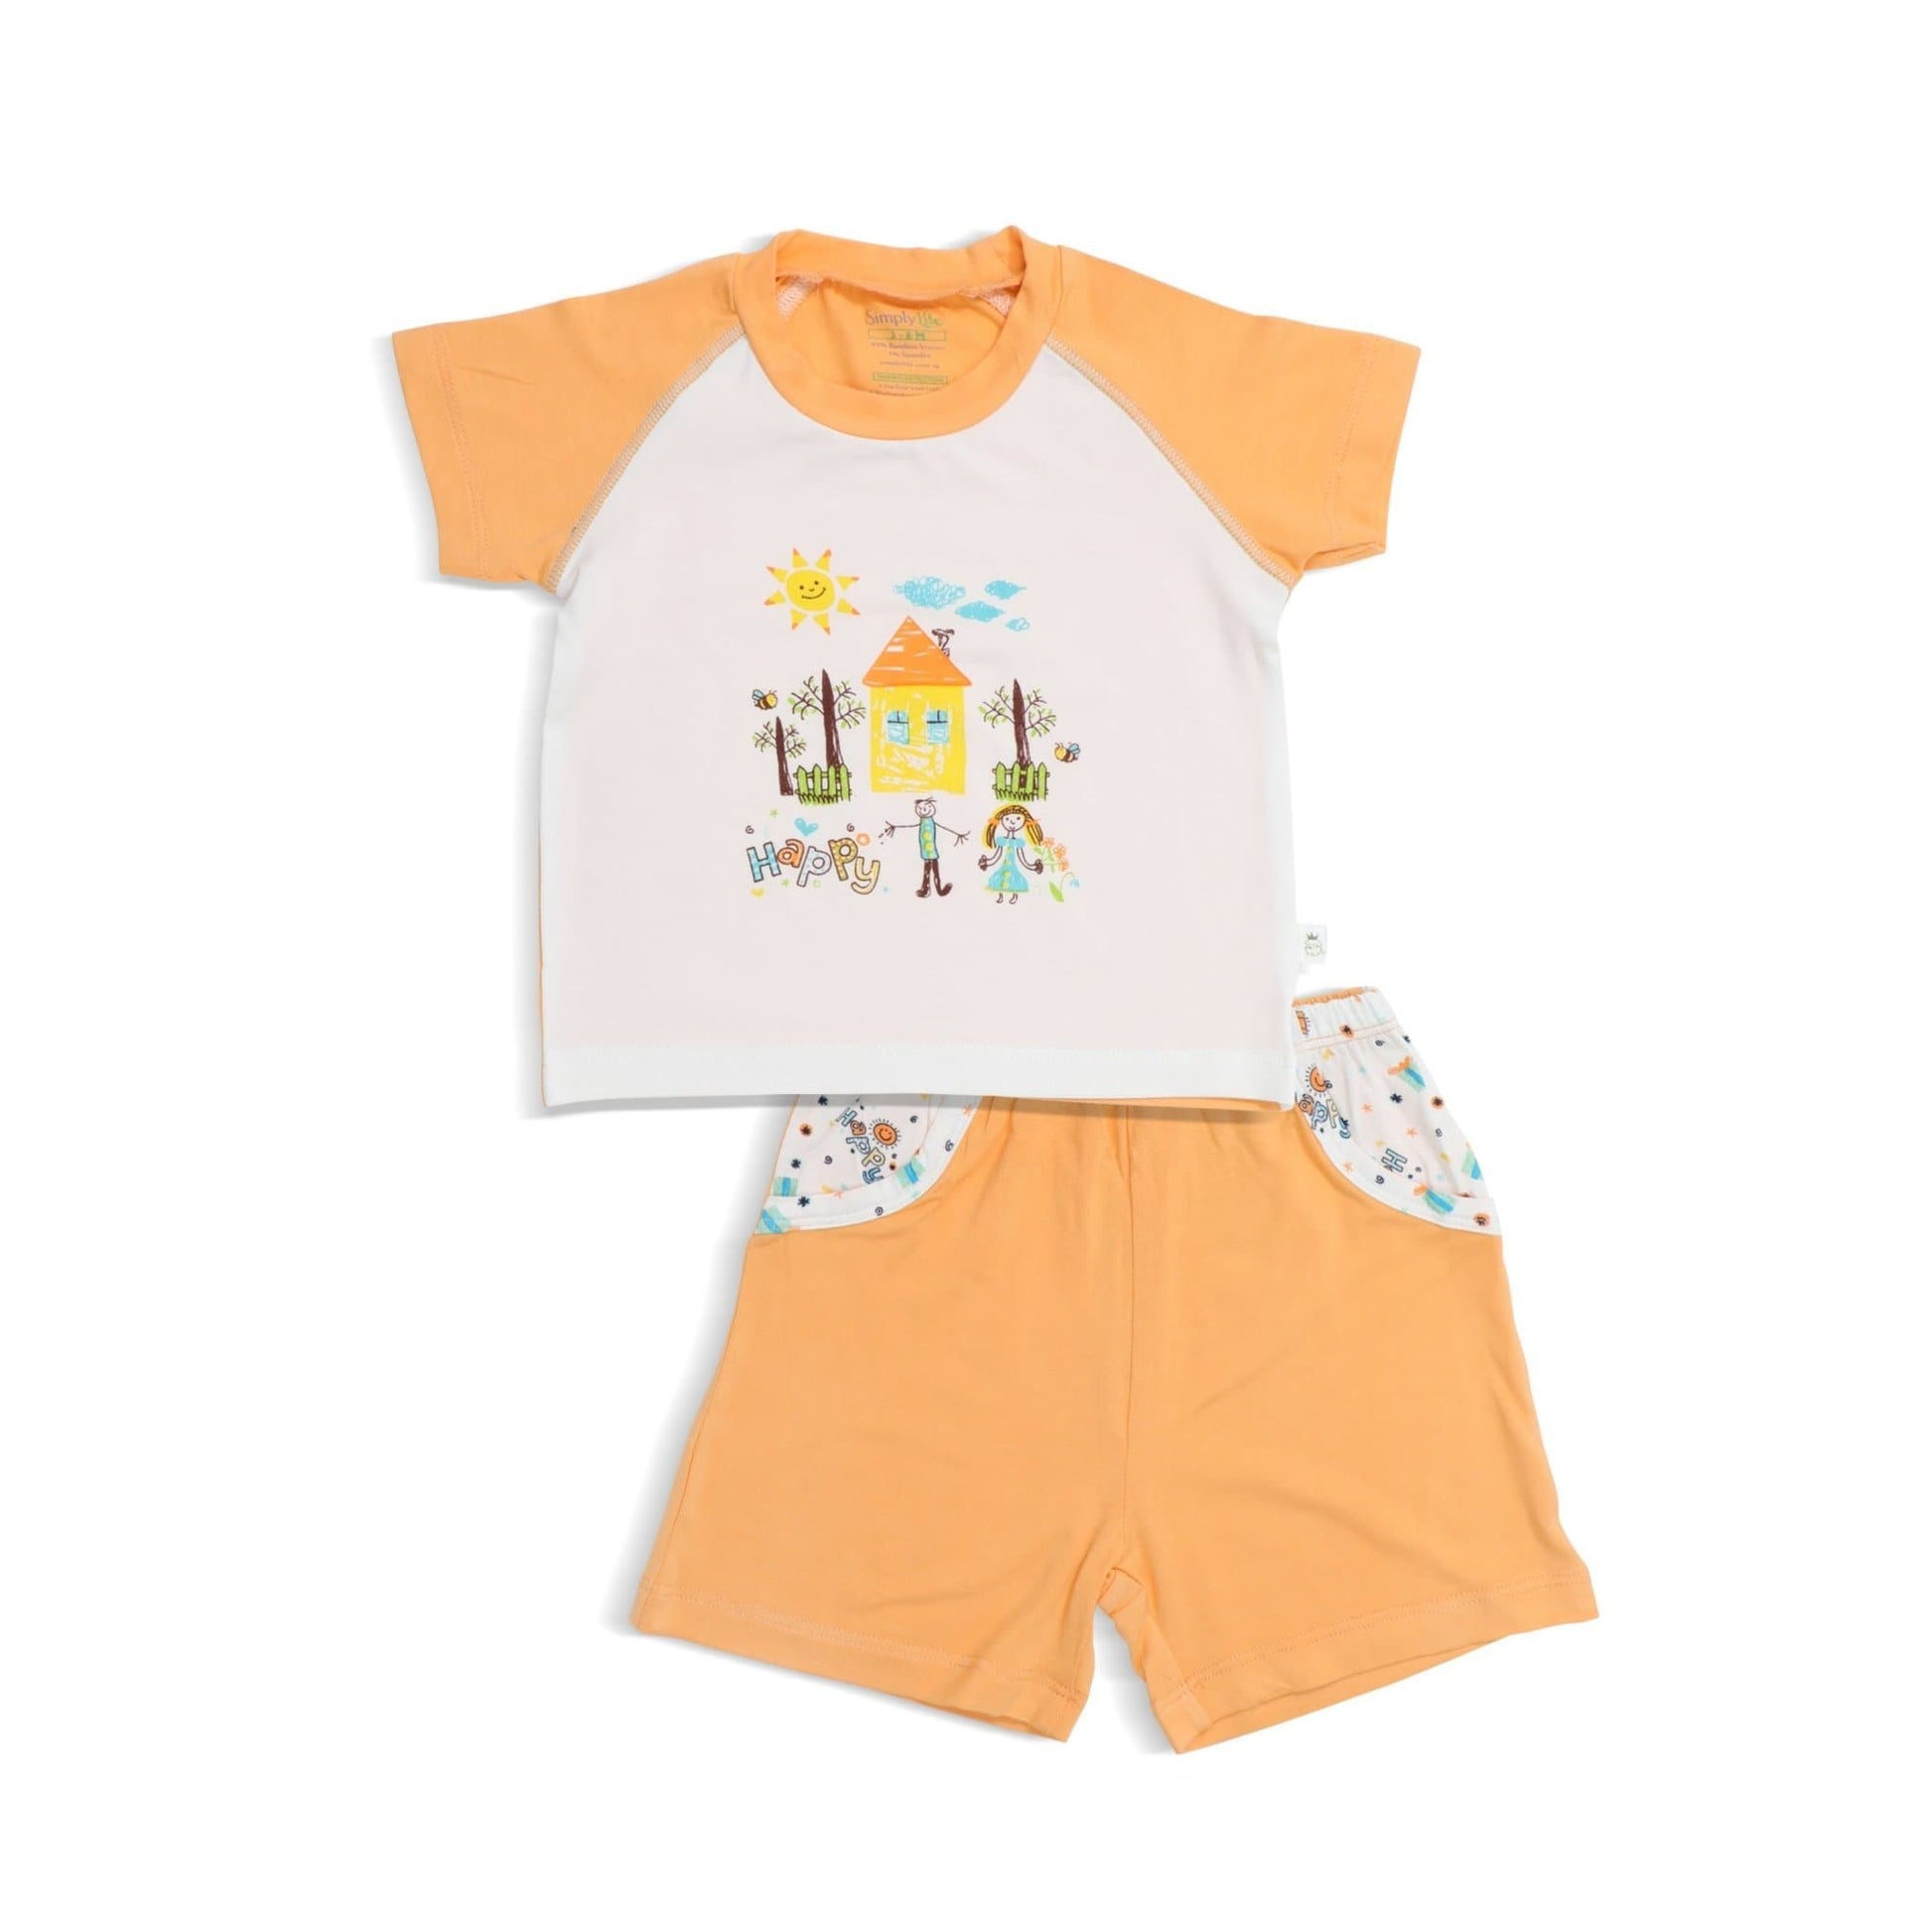 Happy - Shorts & Tee Set by simplylifebaby